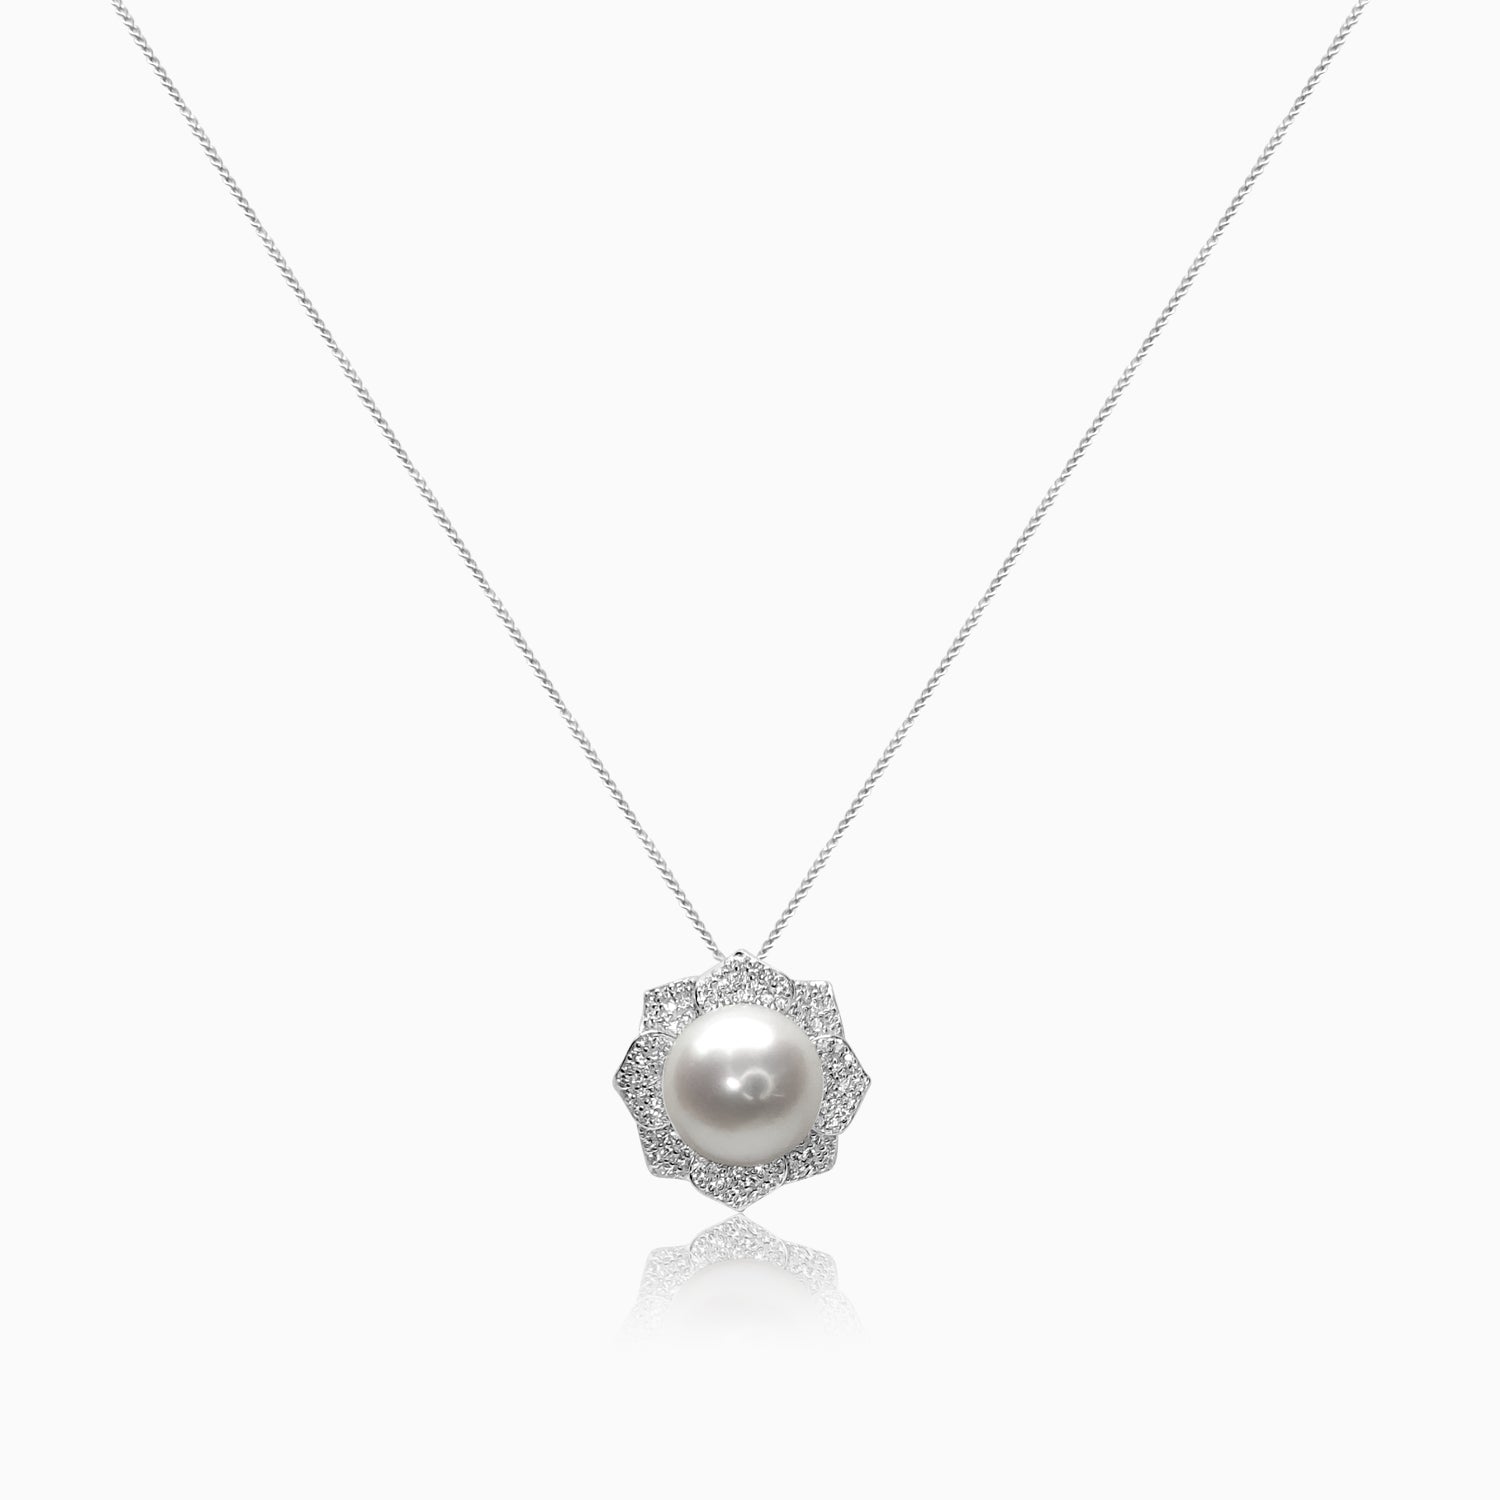 Silver Sparkling Periwinkle Pearl Flower Pendant